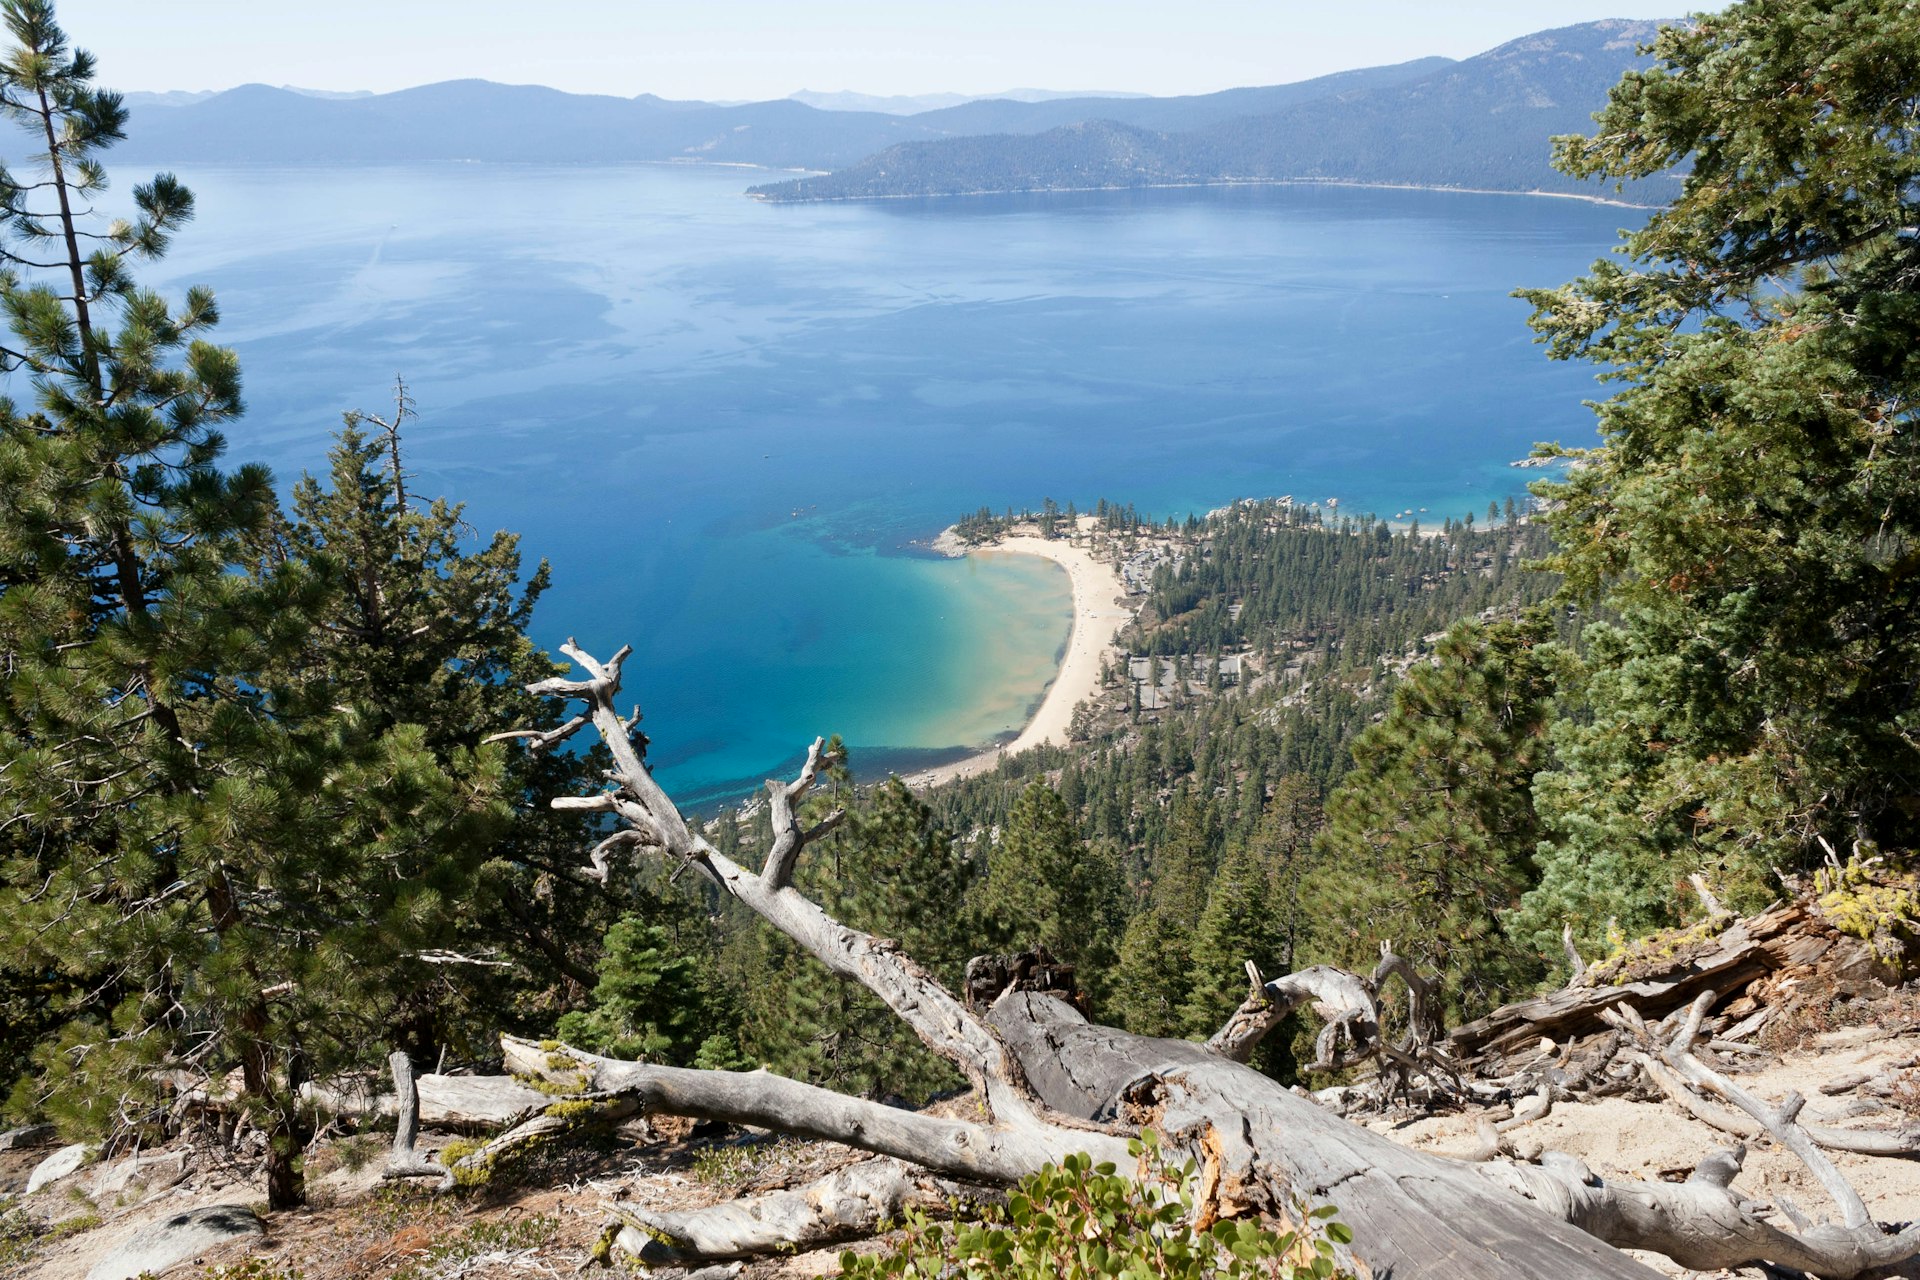 From a high vantage point, a forest, fallen tree, beach and the blue expanse of California's Lake Tahoe spread out below